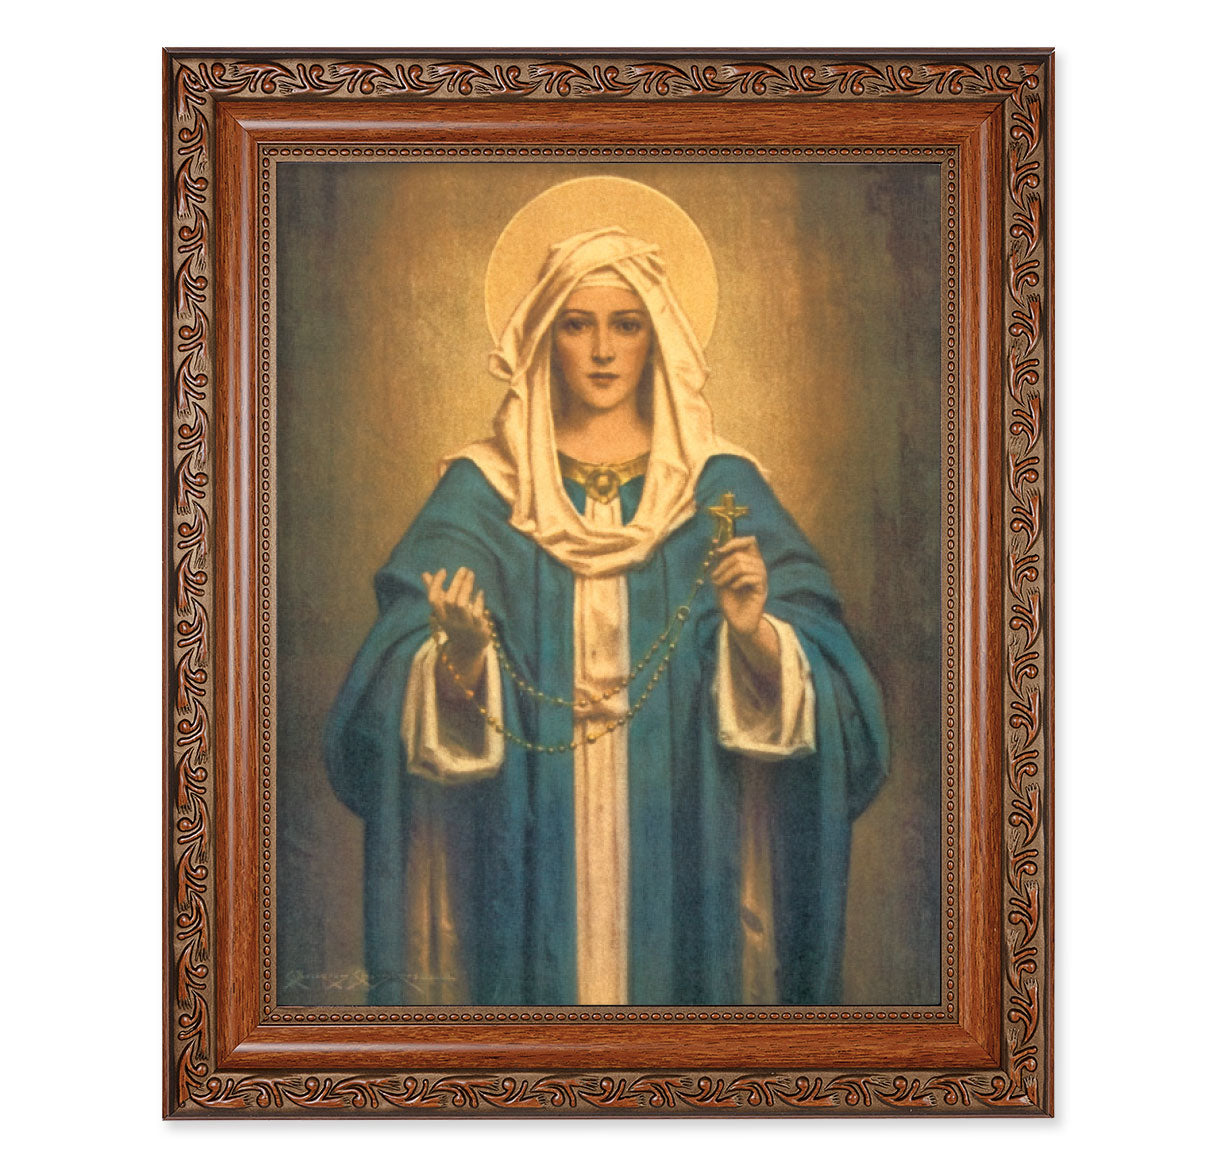 Our Lady of the Rosary Mahogany Finished Framed Art